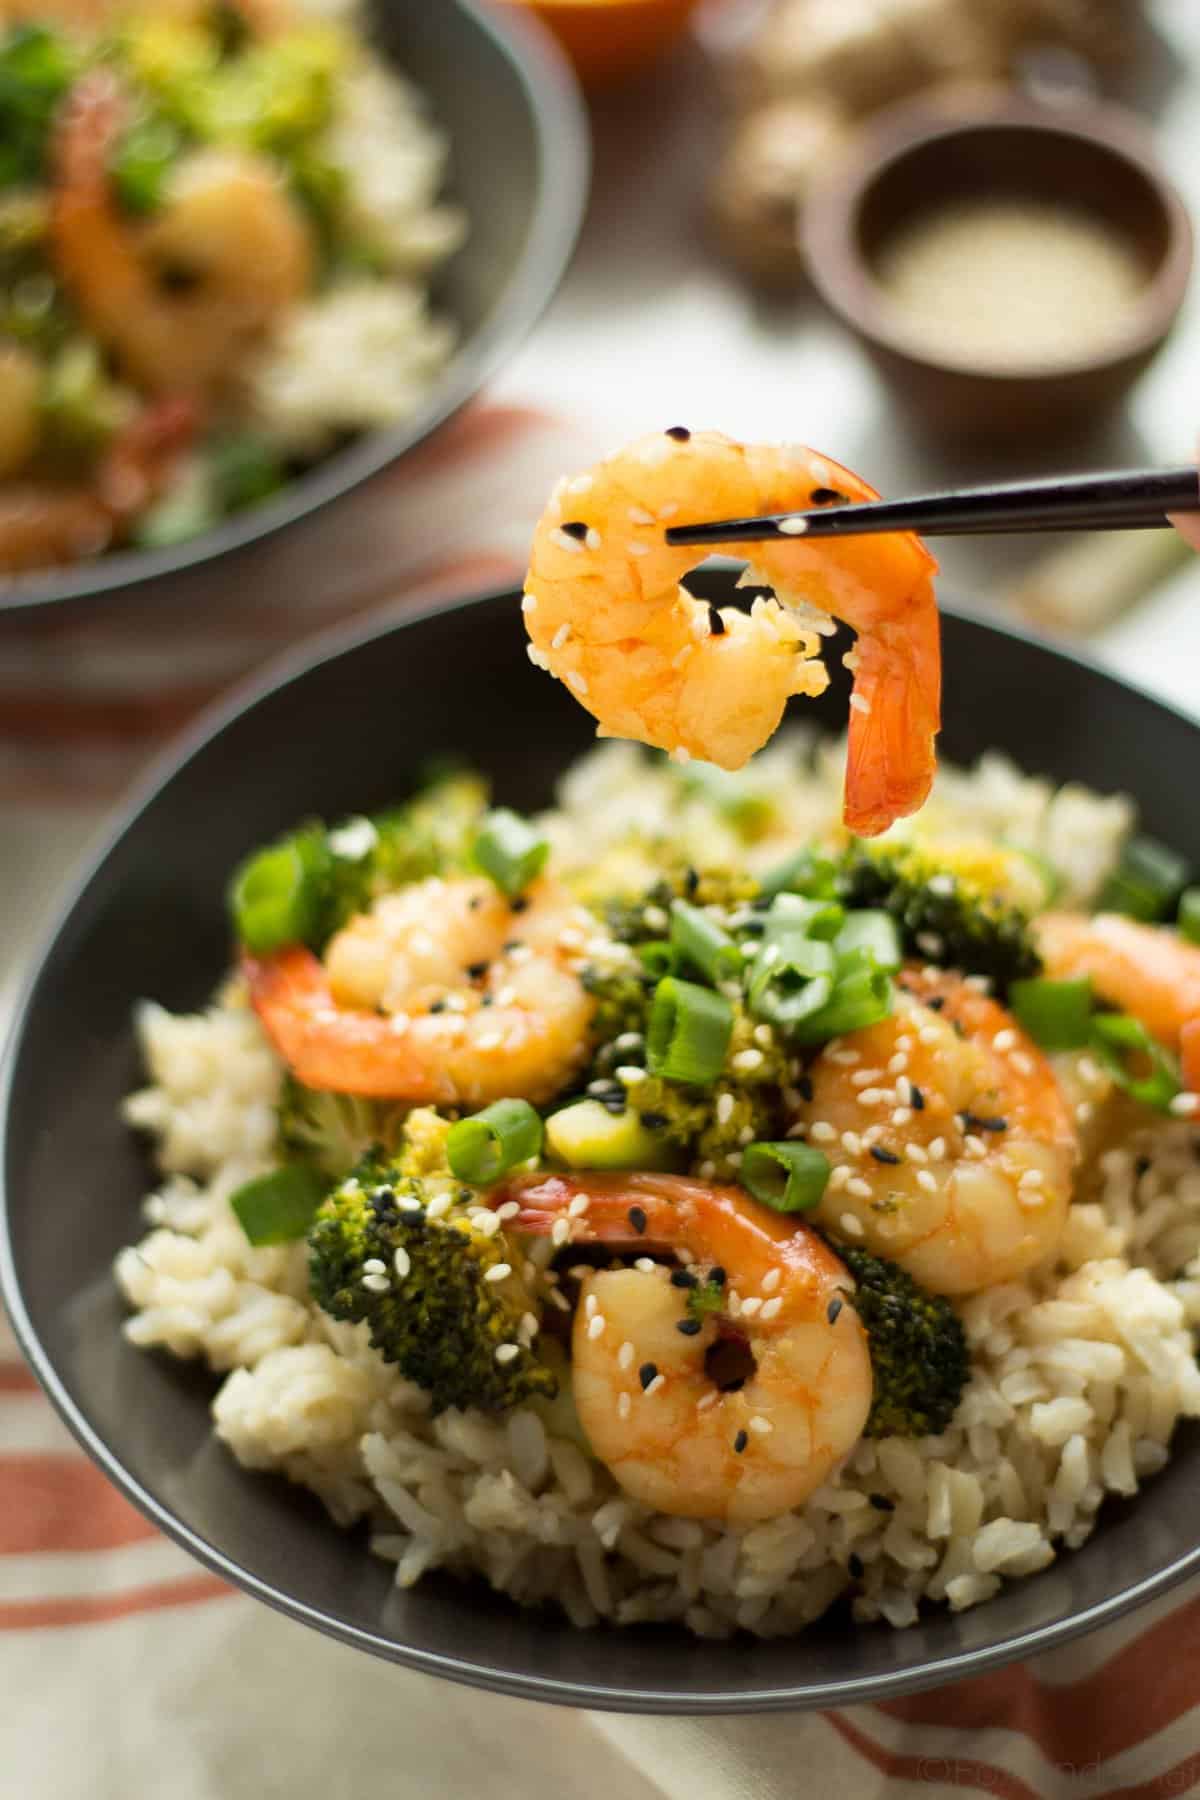 This healthier Orange Sesame Shrimp is a quick and flavorful weeknight dinner!